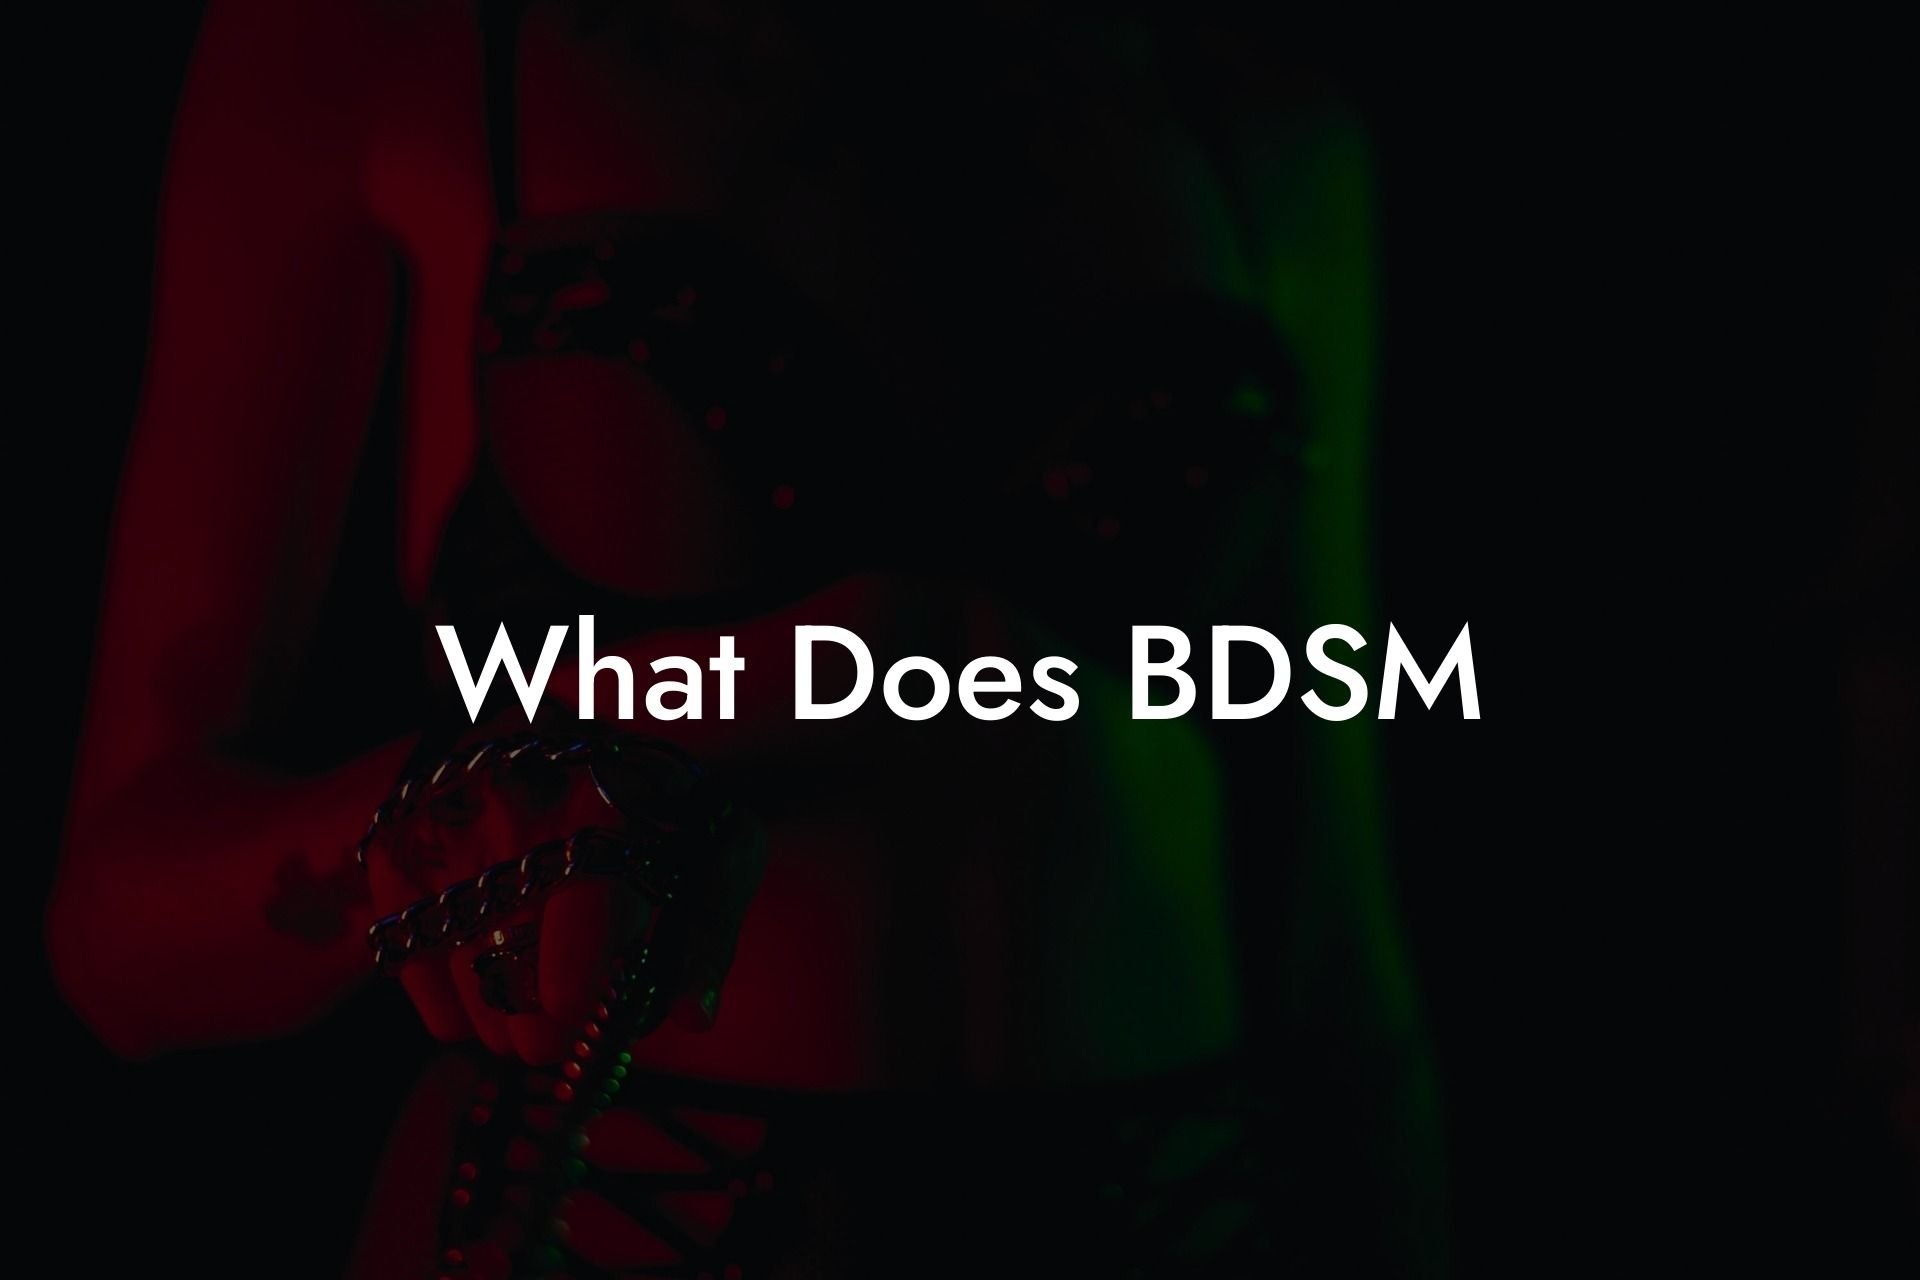 What Does BDSM